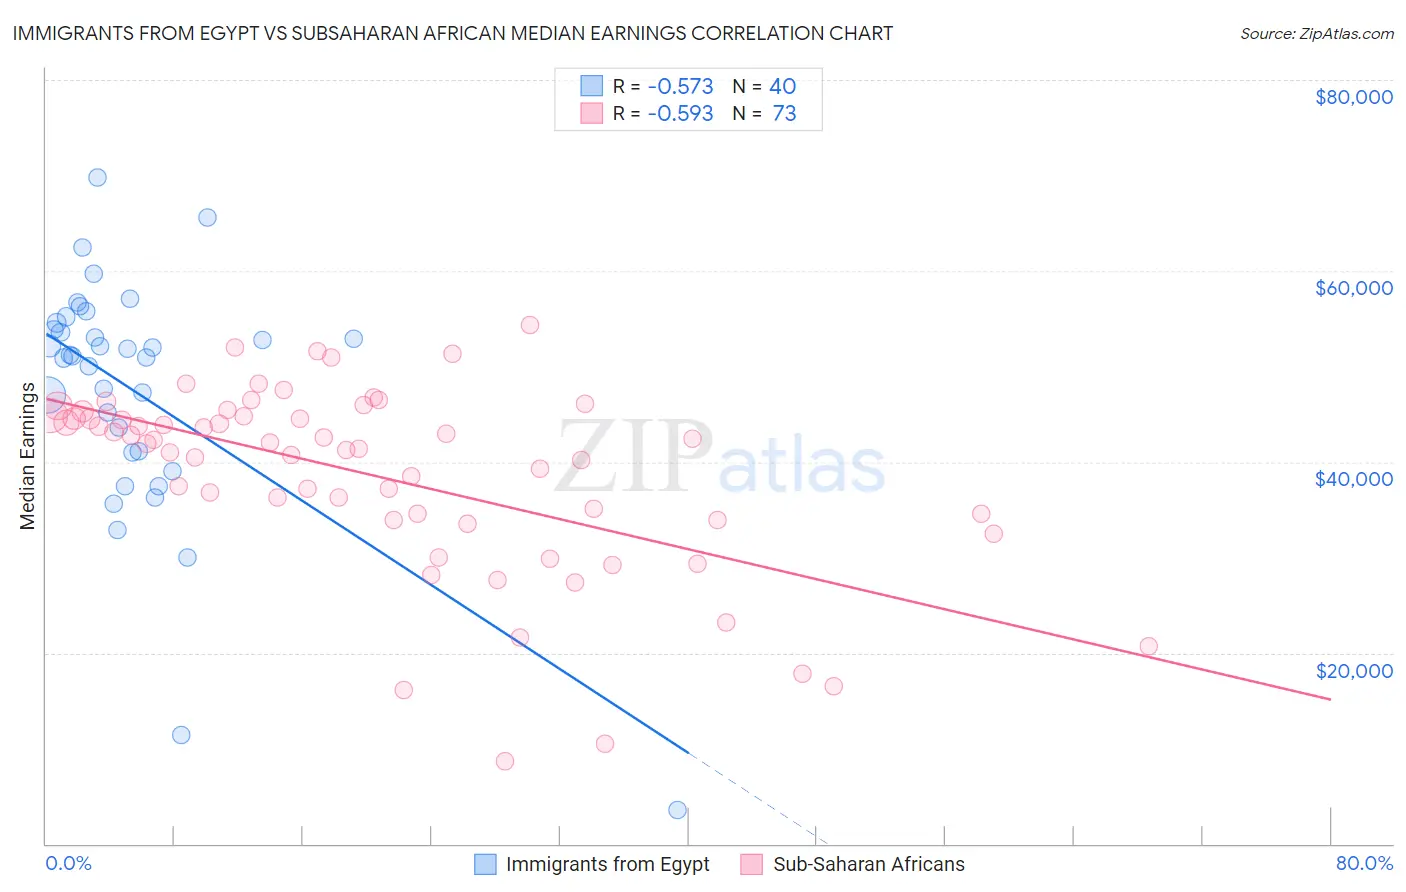 Immigrants from Egypt vs Subsaharan African Median Earnings